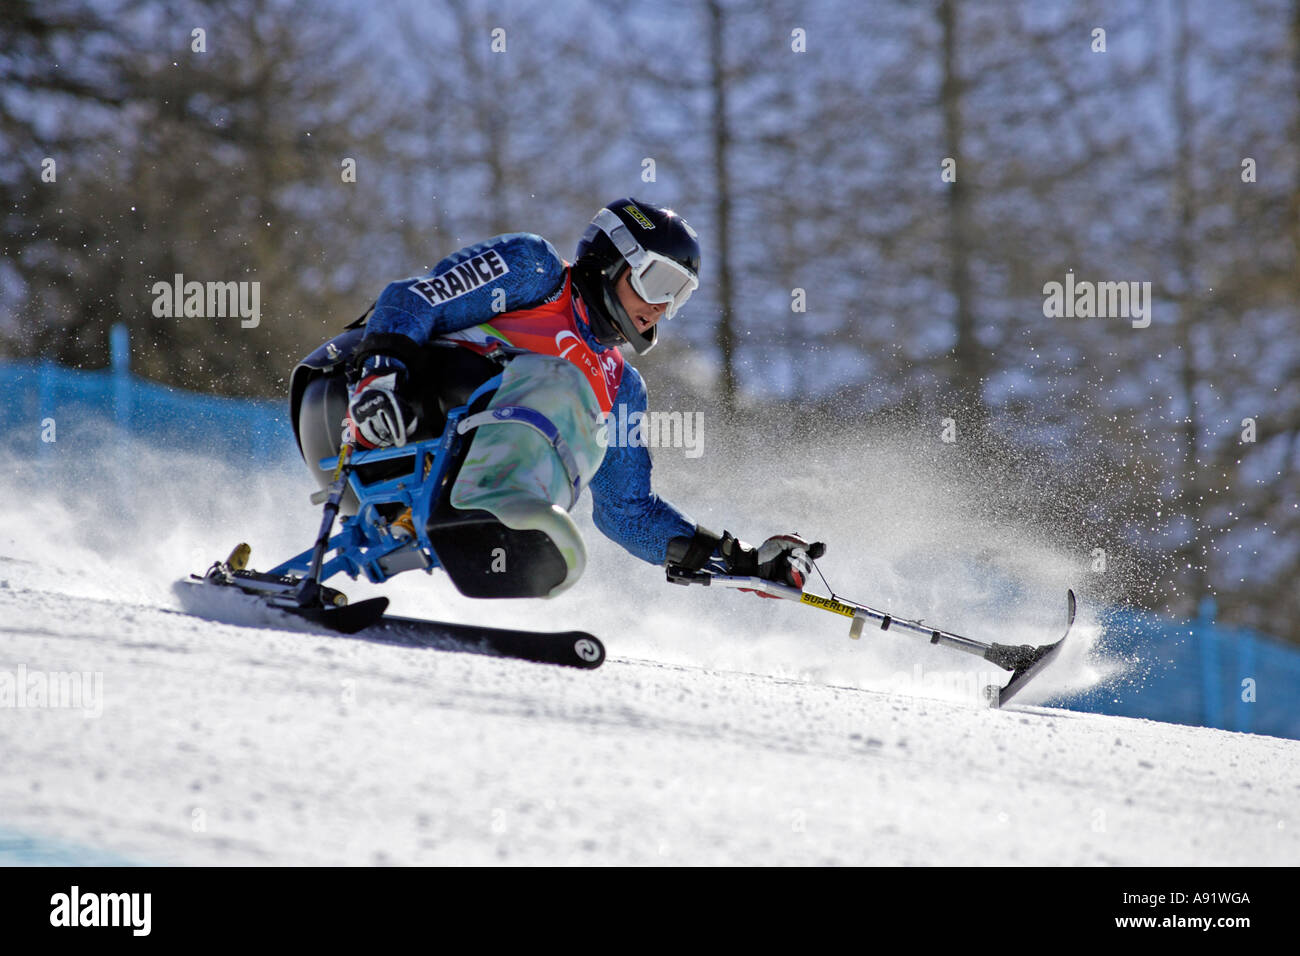 Yohann Taberlet LW12 1 of France in the Mens Alpine Skiing Super G Sitting competition Stock Photo